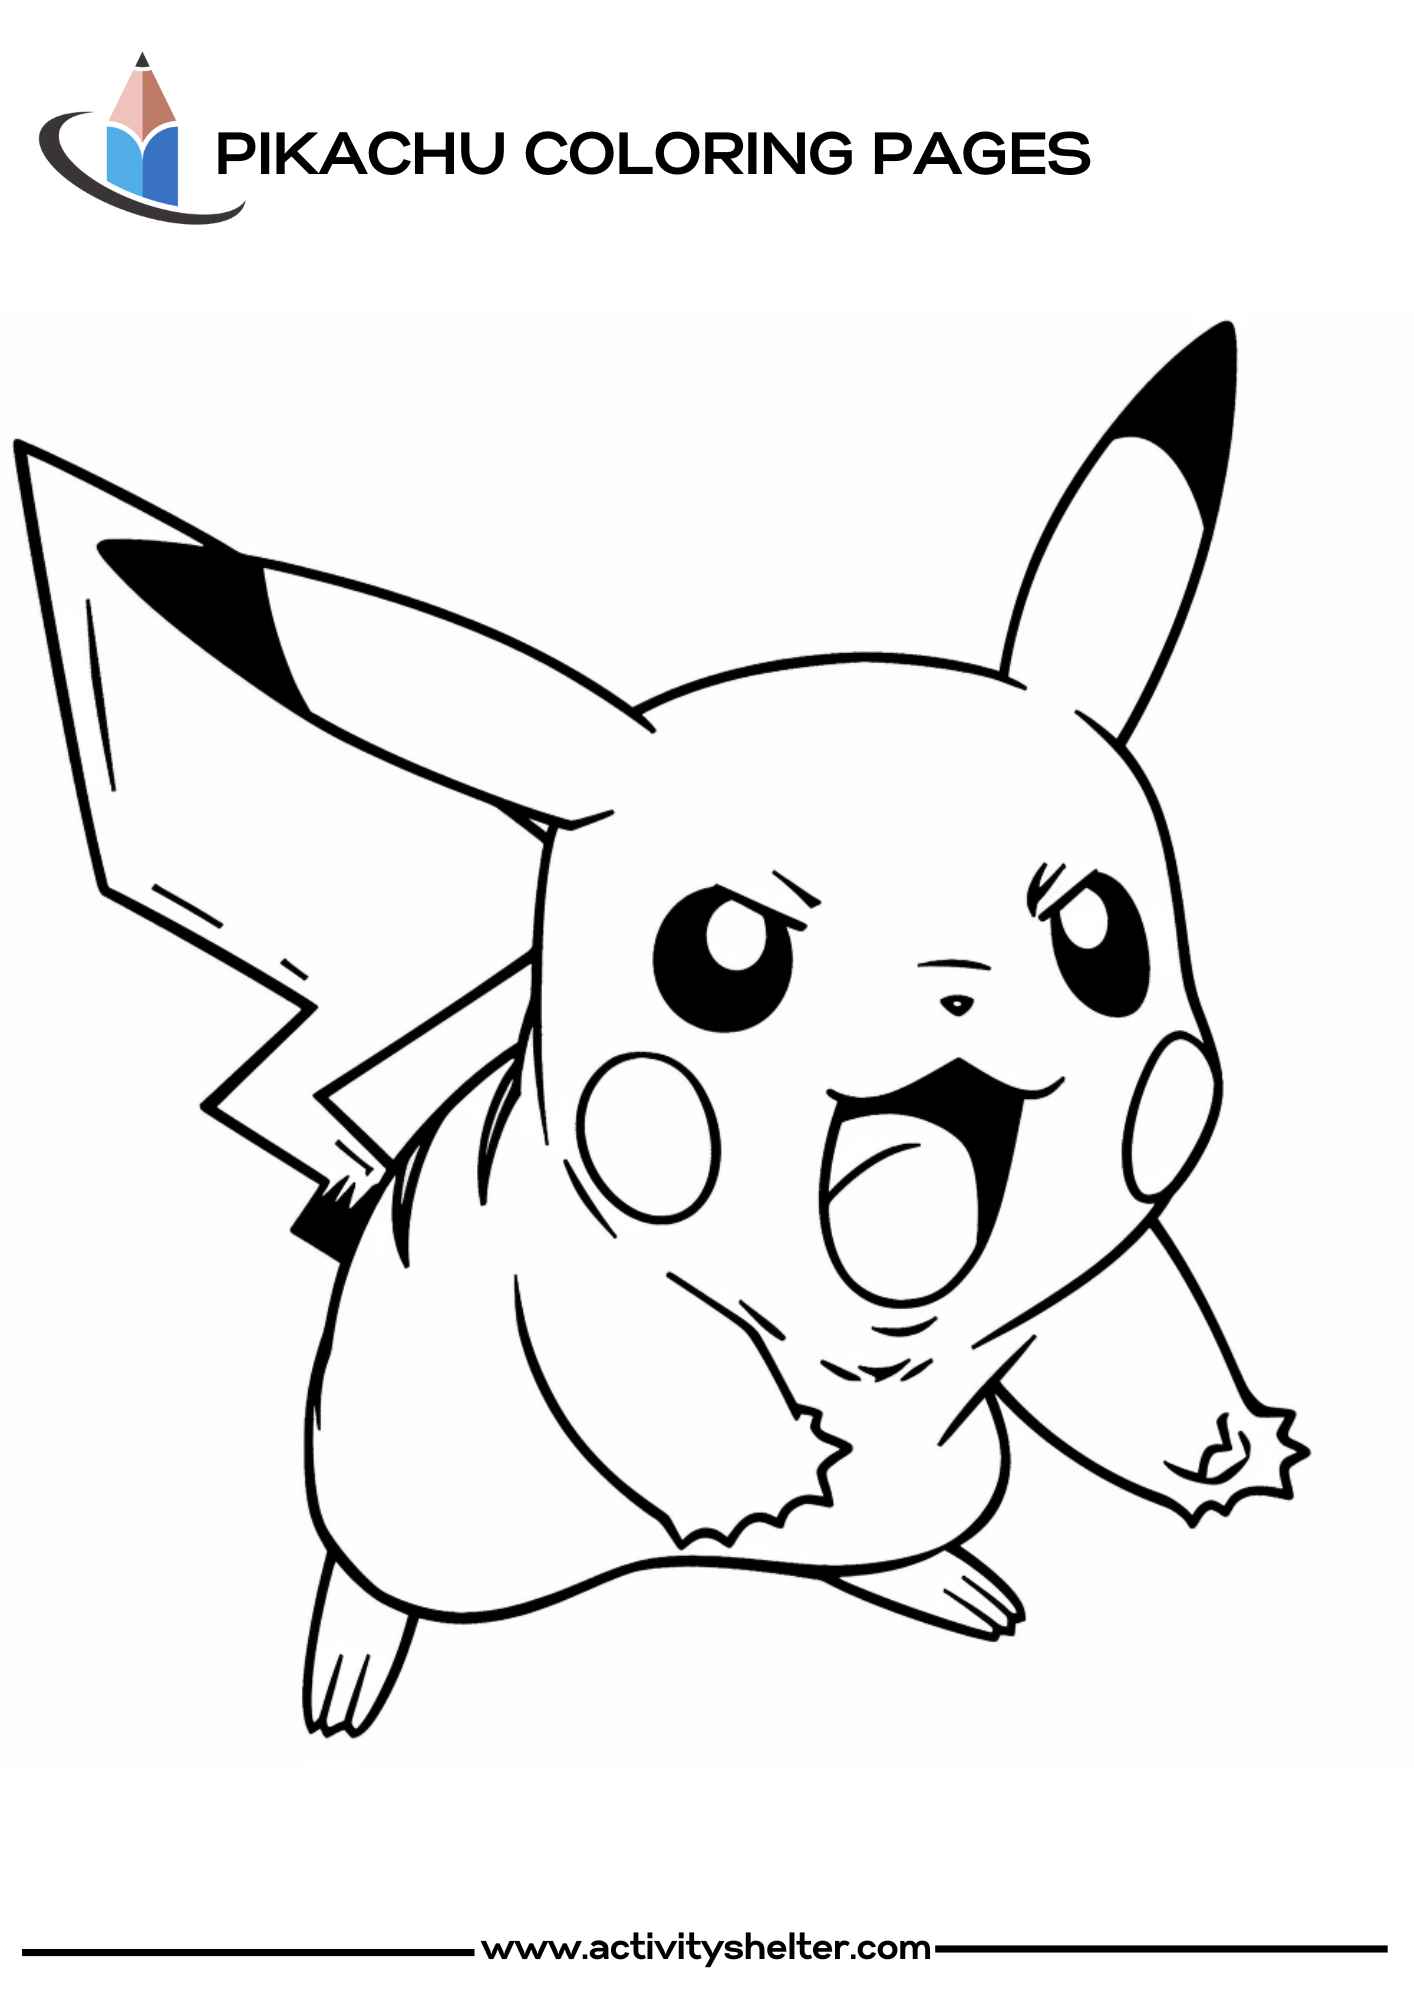 Printable Angry Pikachu Coloring Pages